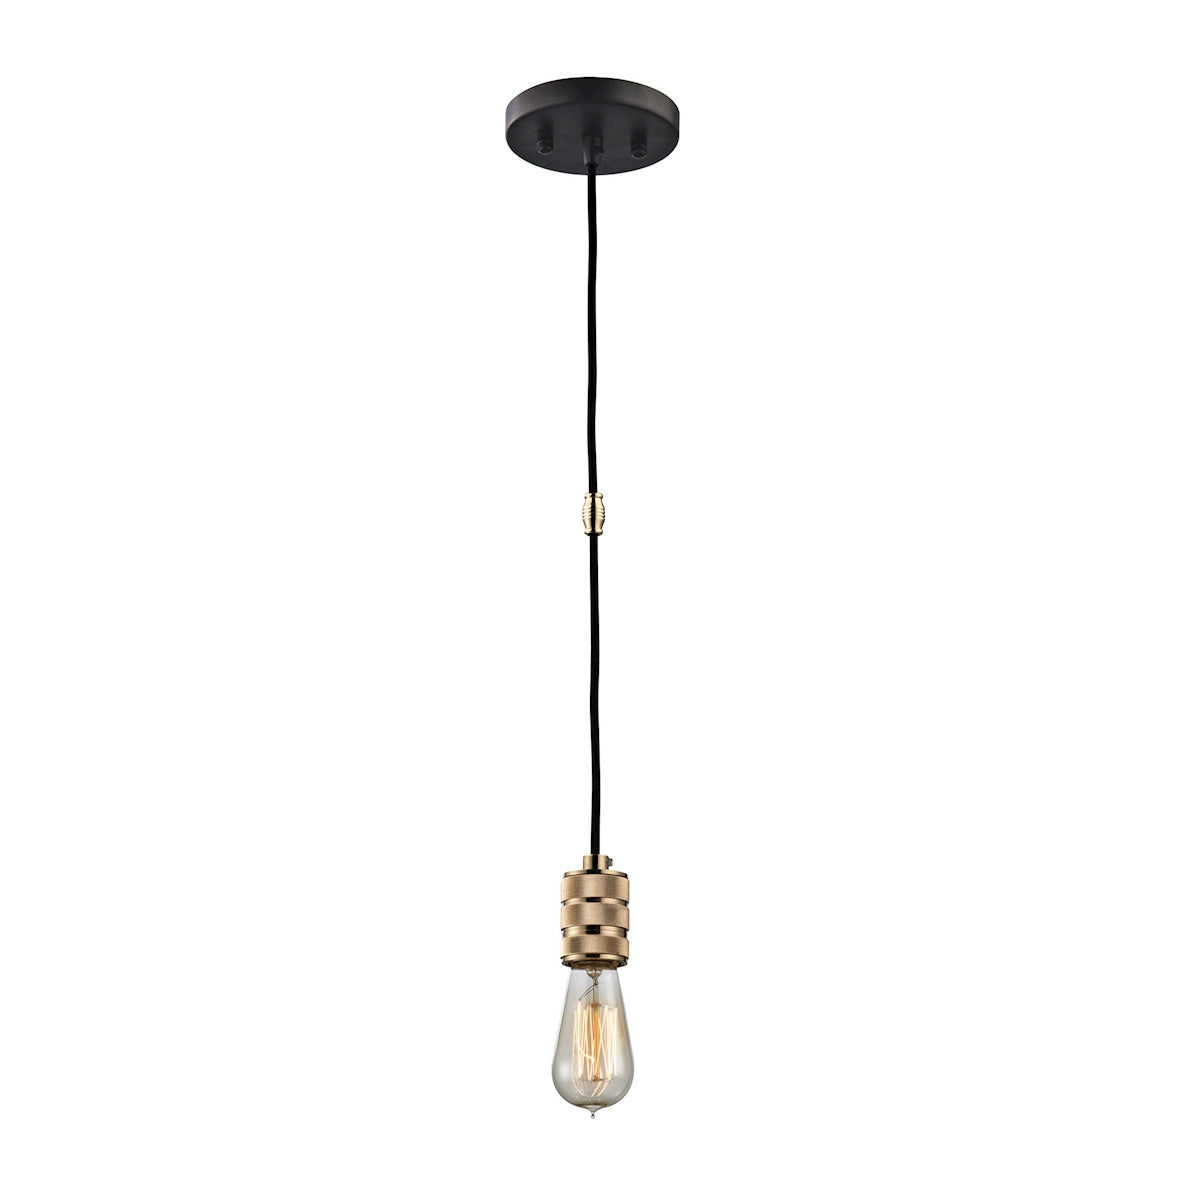 ELK Lighting 14391/1 Camley 1-Light Mini Pendant in Oil Rubbed Bronze and Polished Gold